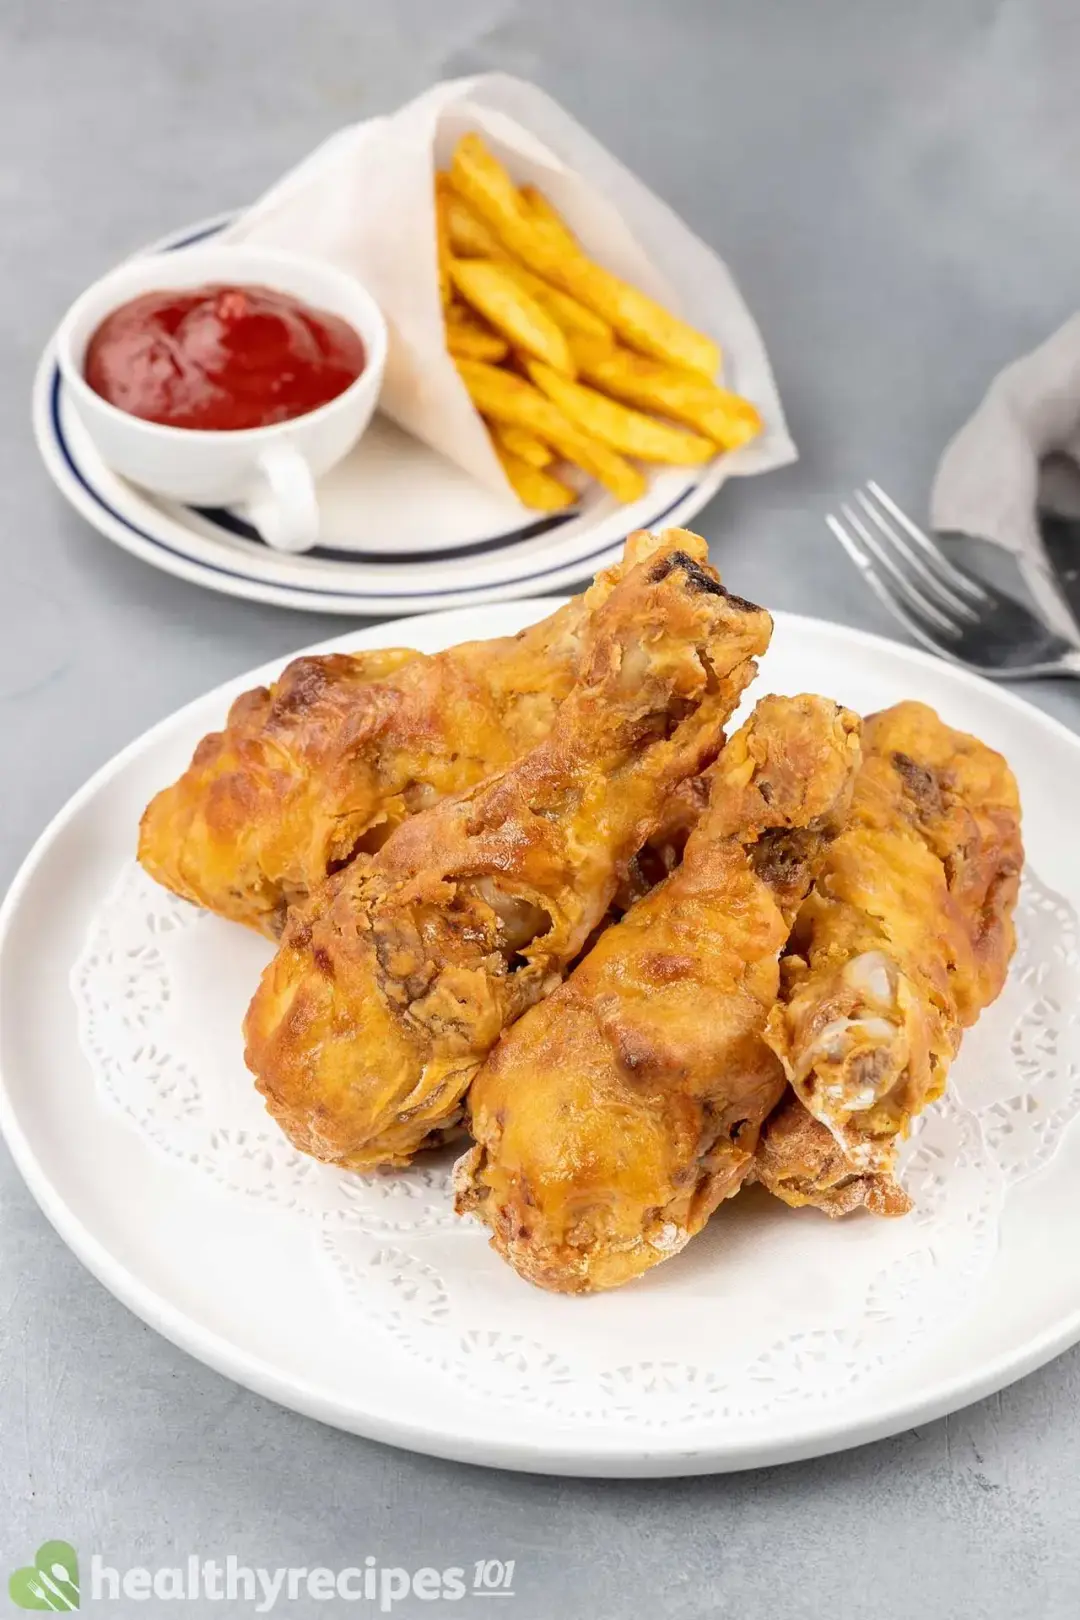 Tips for Making Crispy Fried Chicken in an Air Fryer